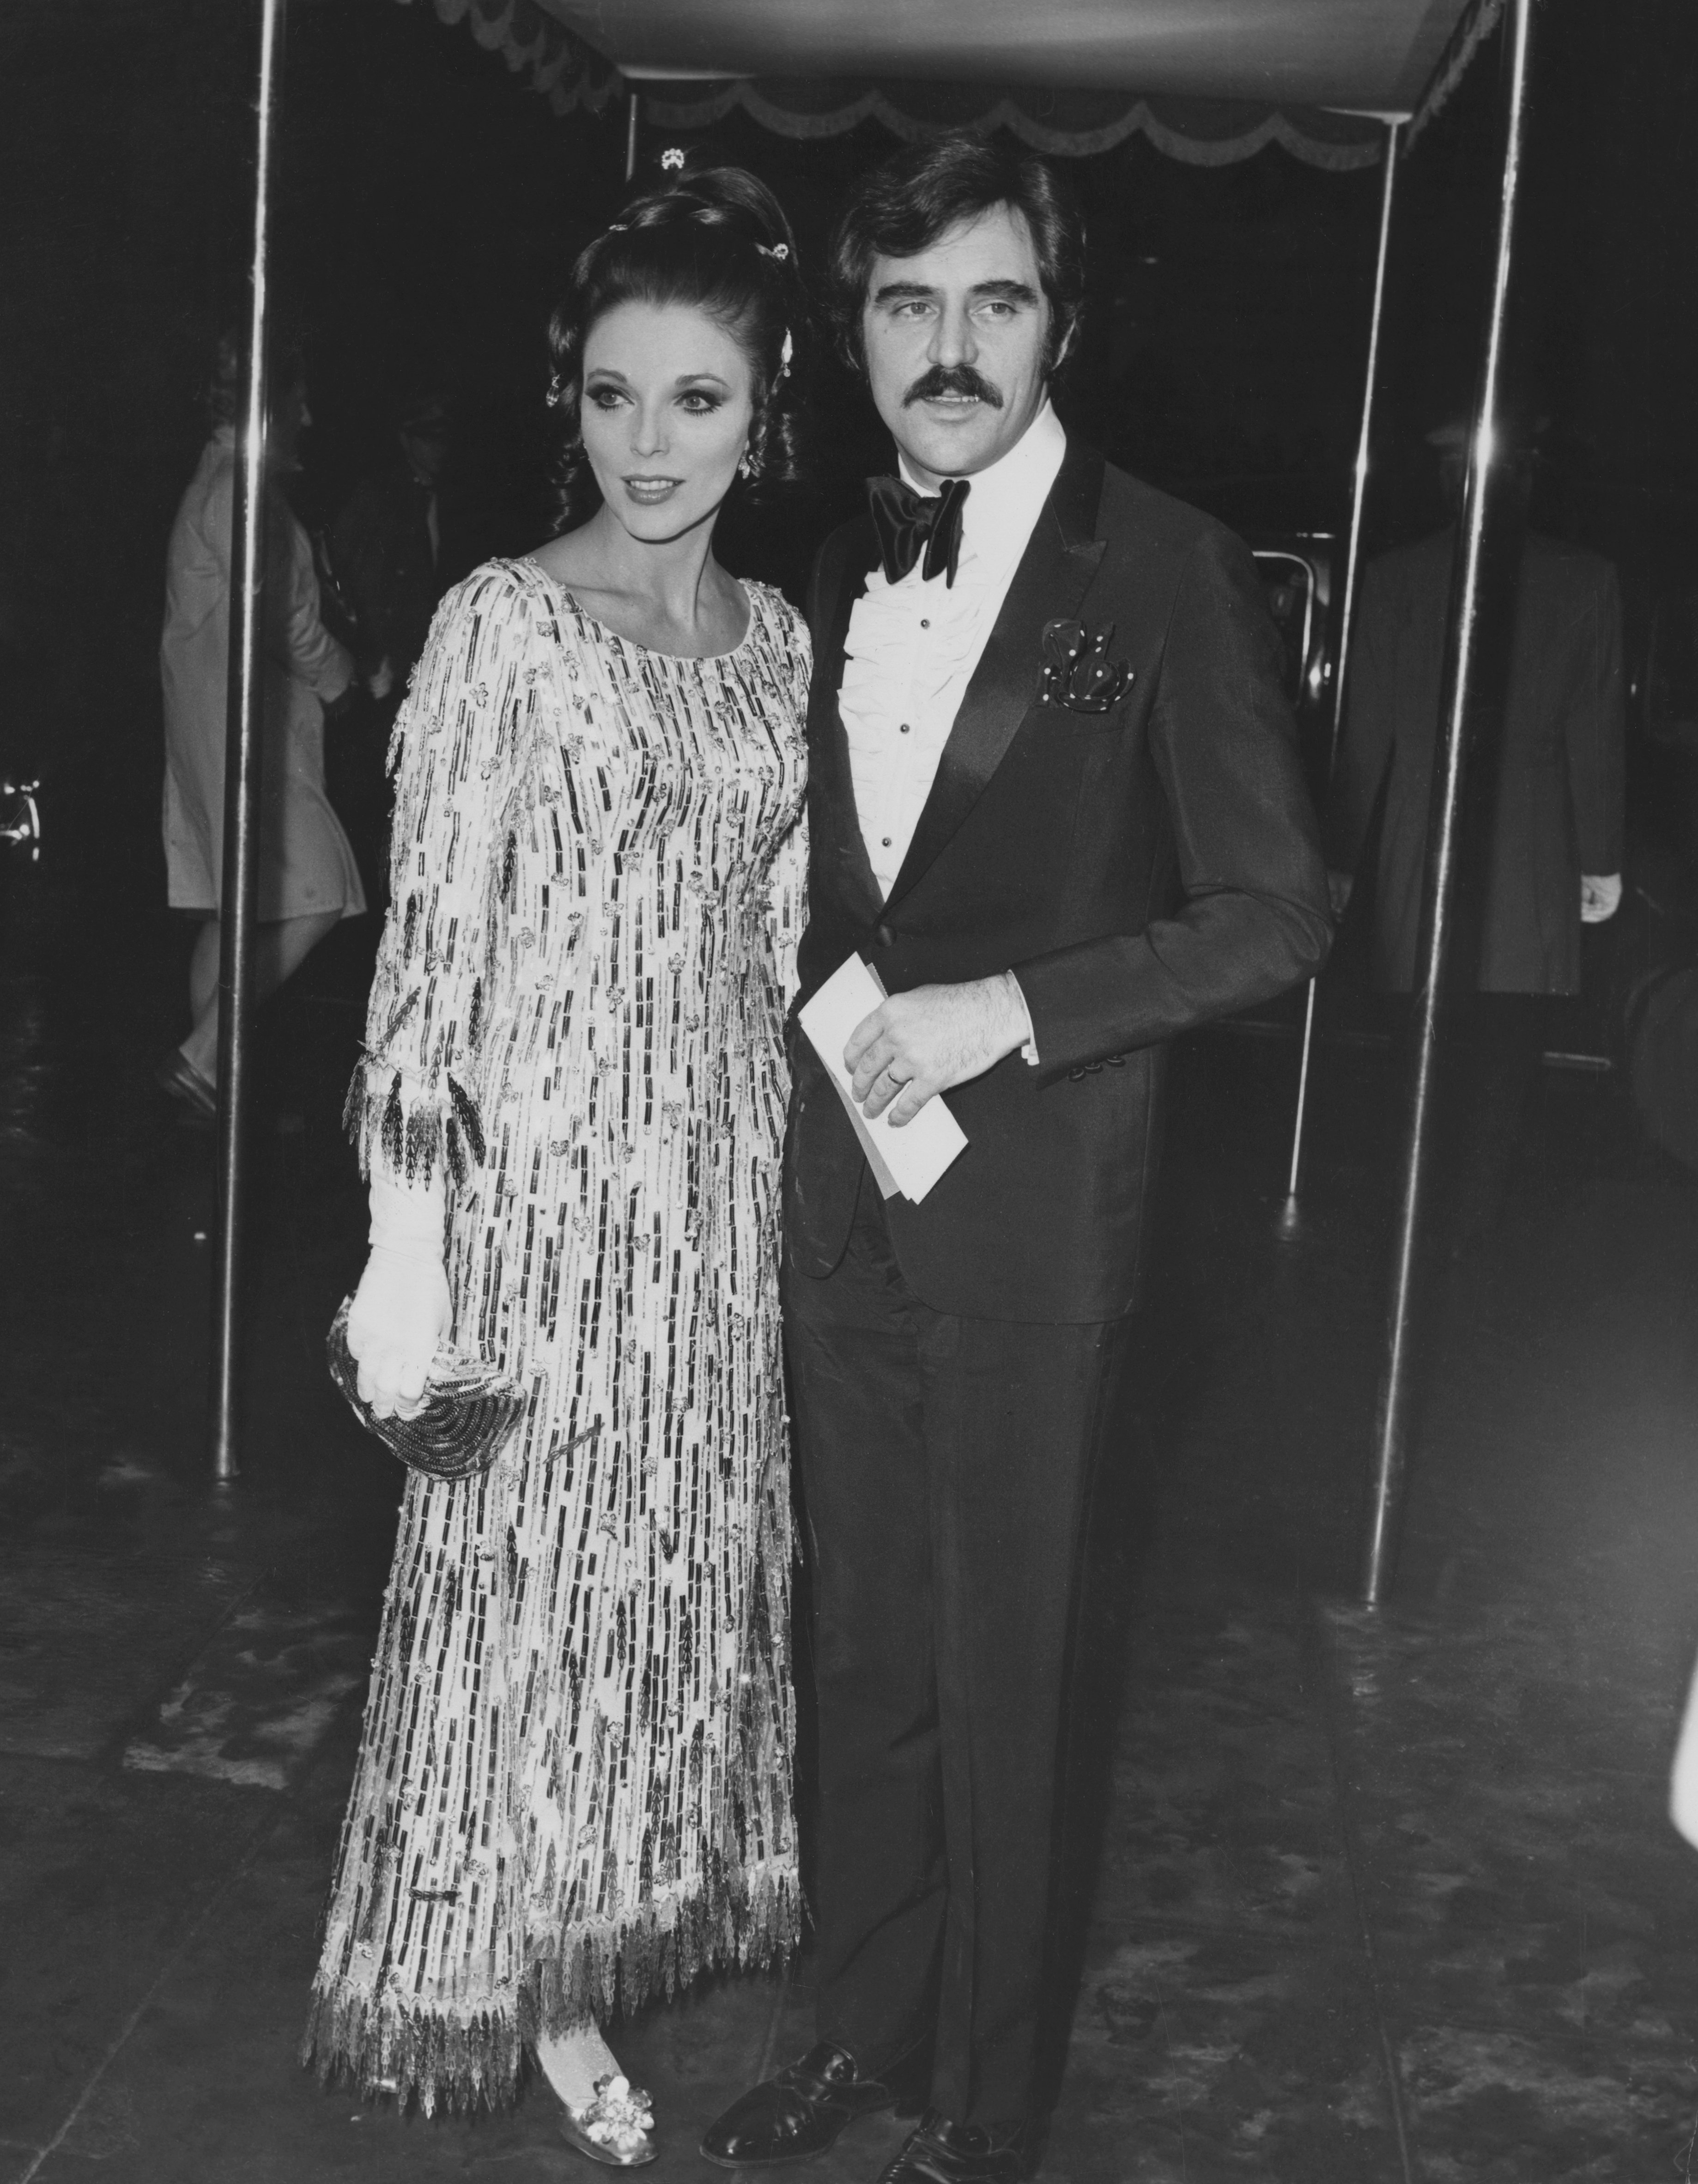 Anthony Newley and Joan Collins arrive at the Odeon Marble Arch in London for the premiere of the film 'Doctor Dolittle', 12th December 1967 | Source: Getty Images